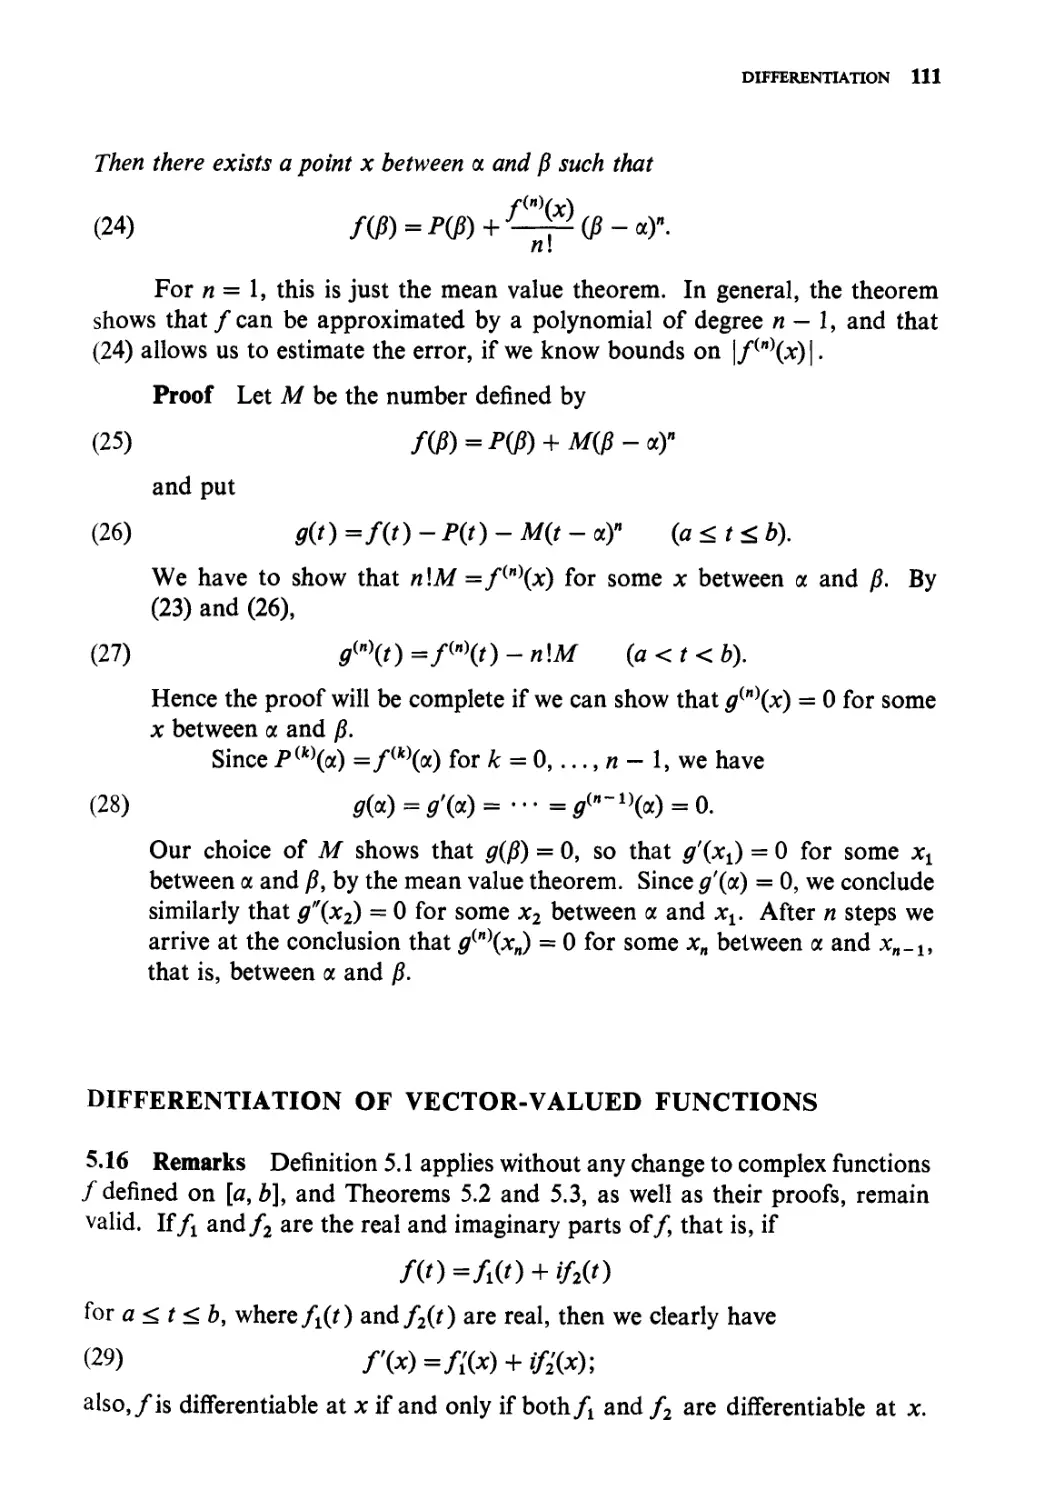 Differentiation of vector-valued functions